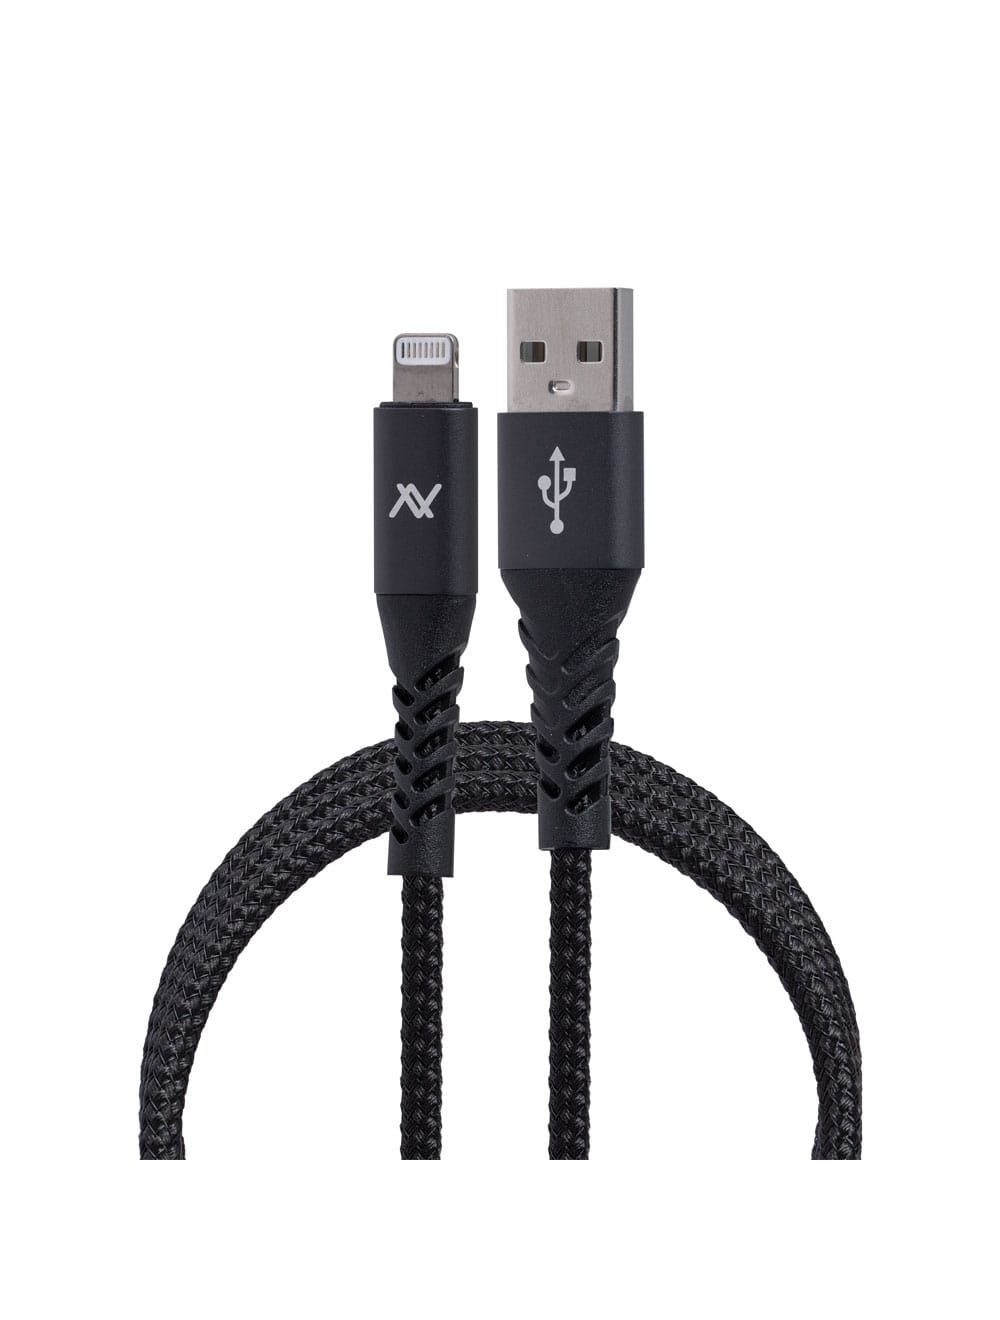 CABLE MOBILE IPHONE/LIGHTNING 3.1A MAX PM-USB-002